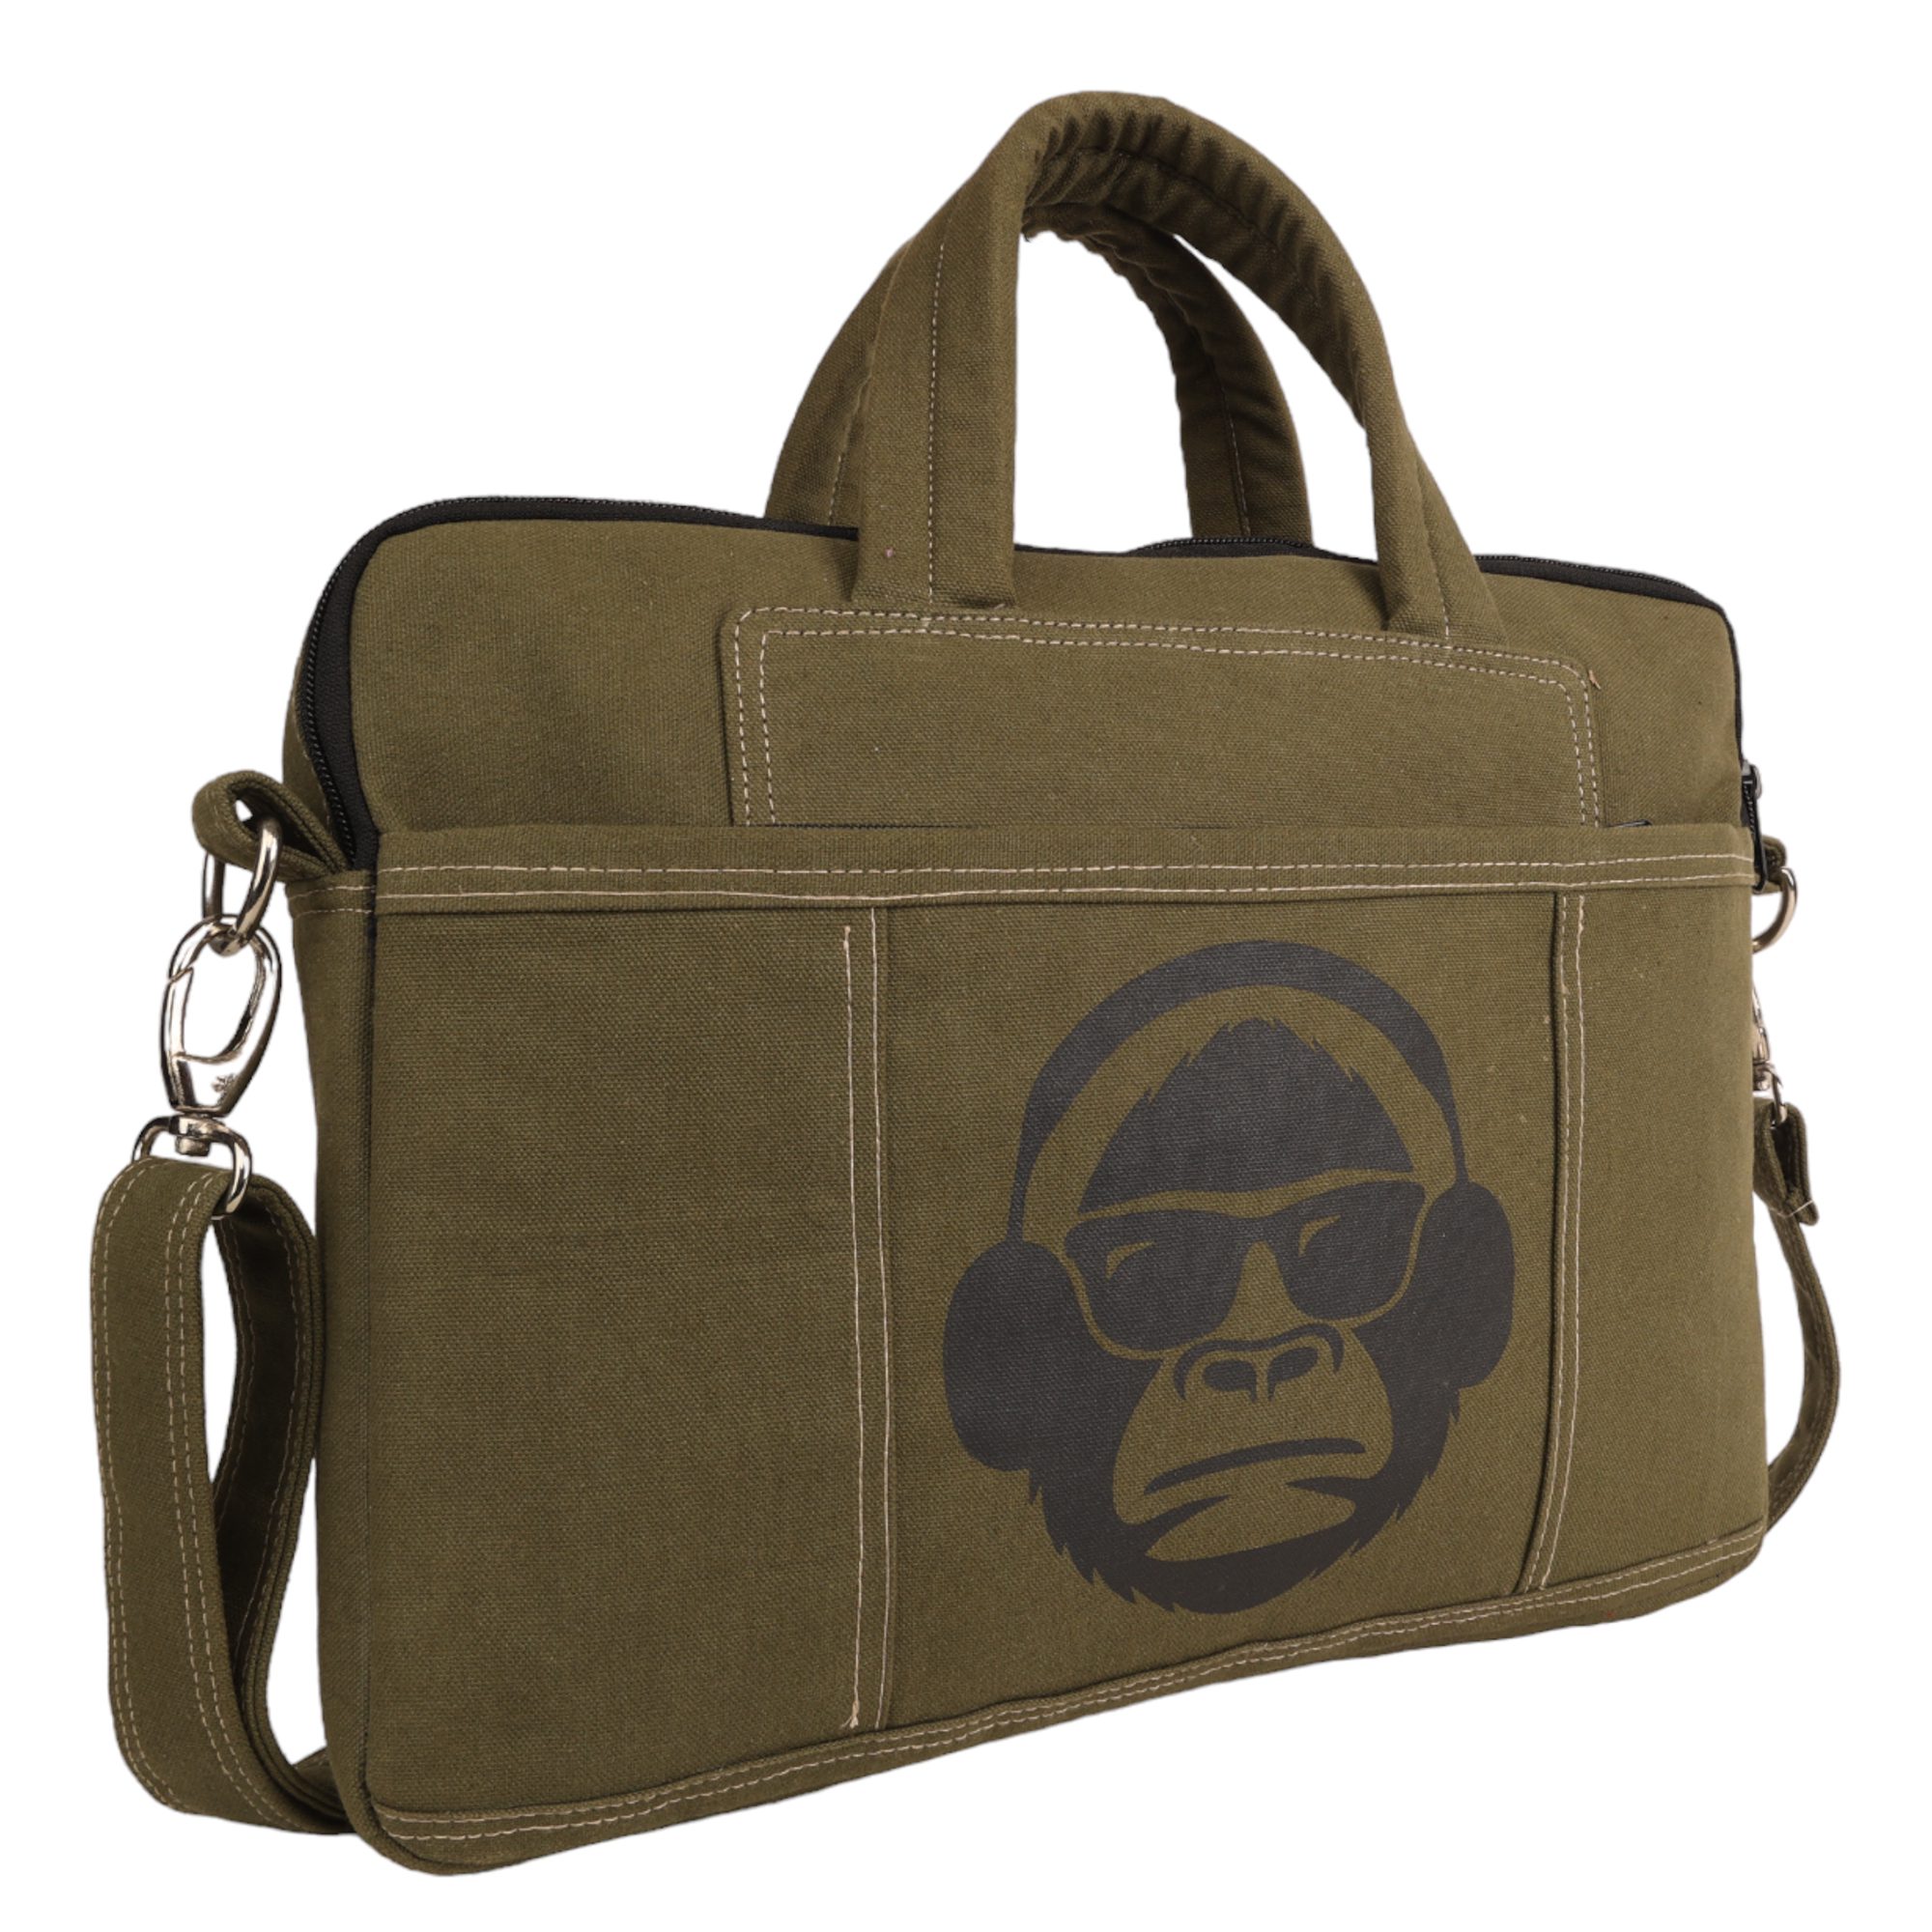 Laptop Bag Briefcase Style with monkey print